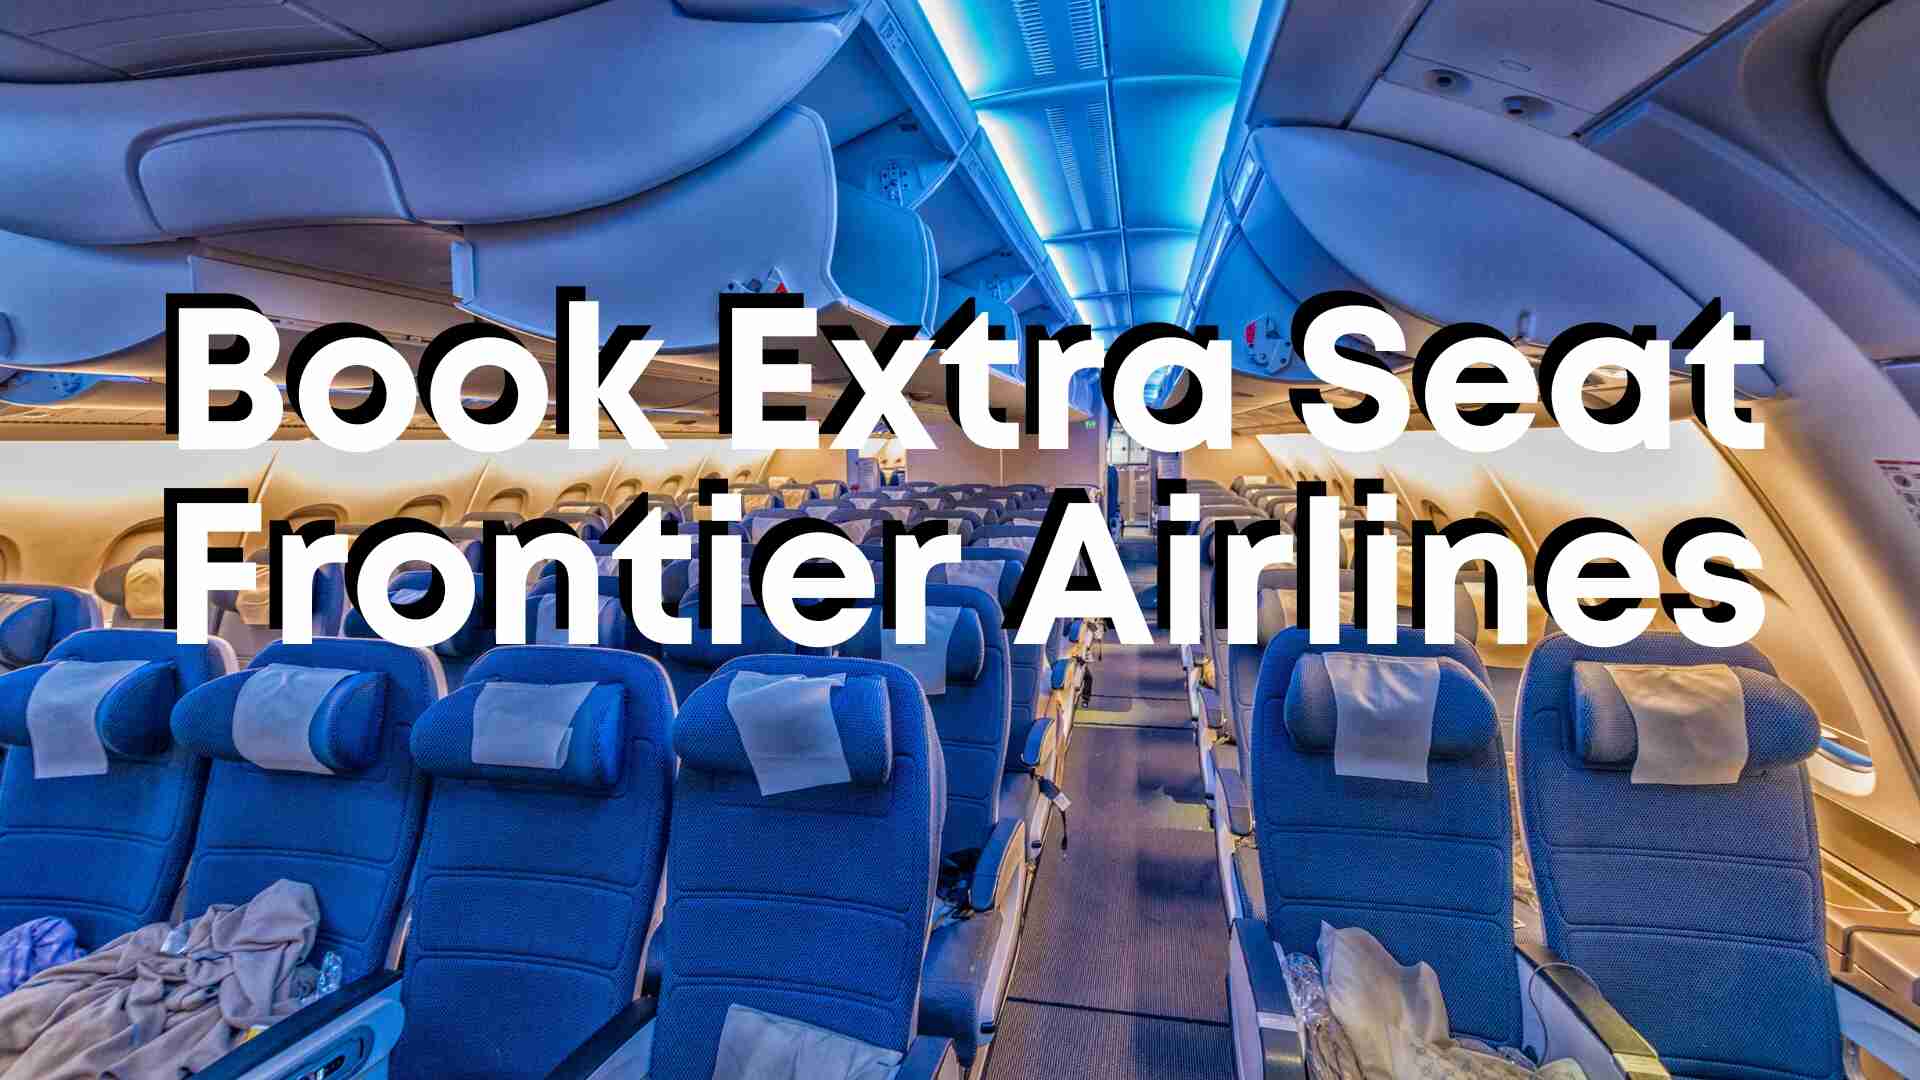 Book an Extra Seat on Frontier Airlines